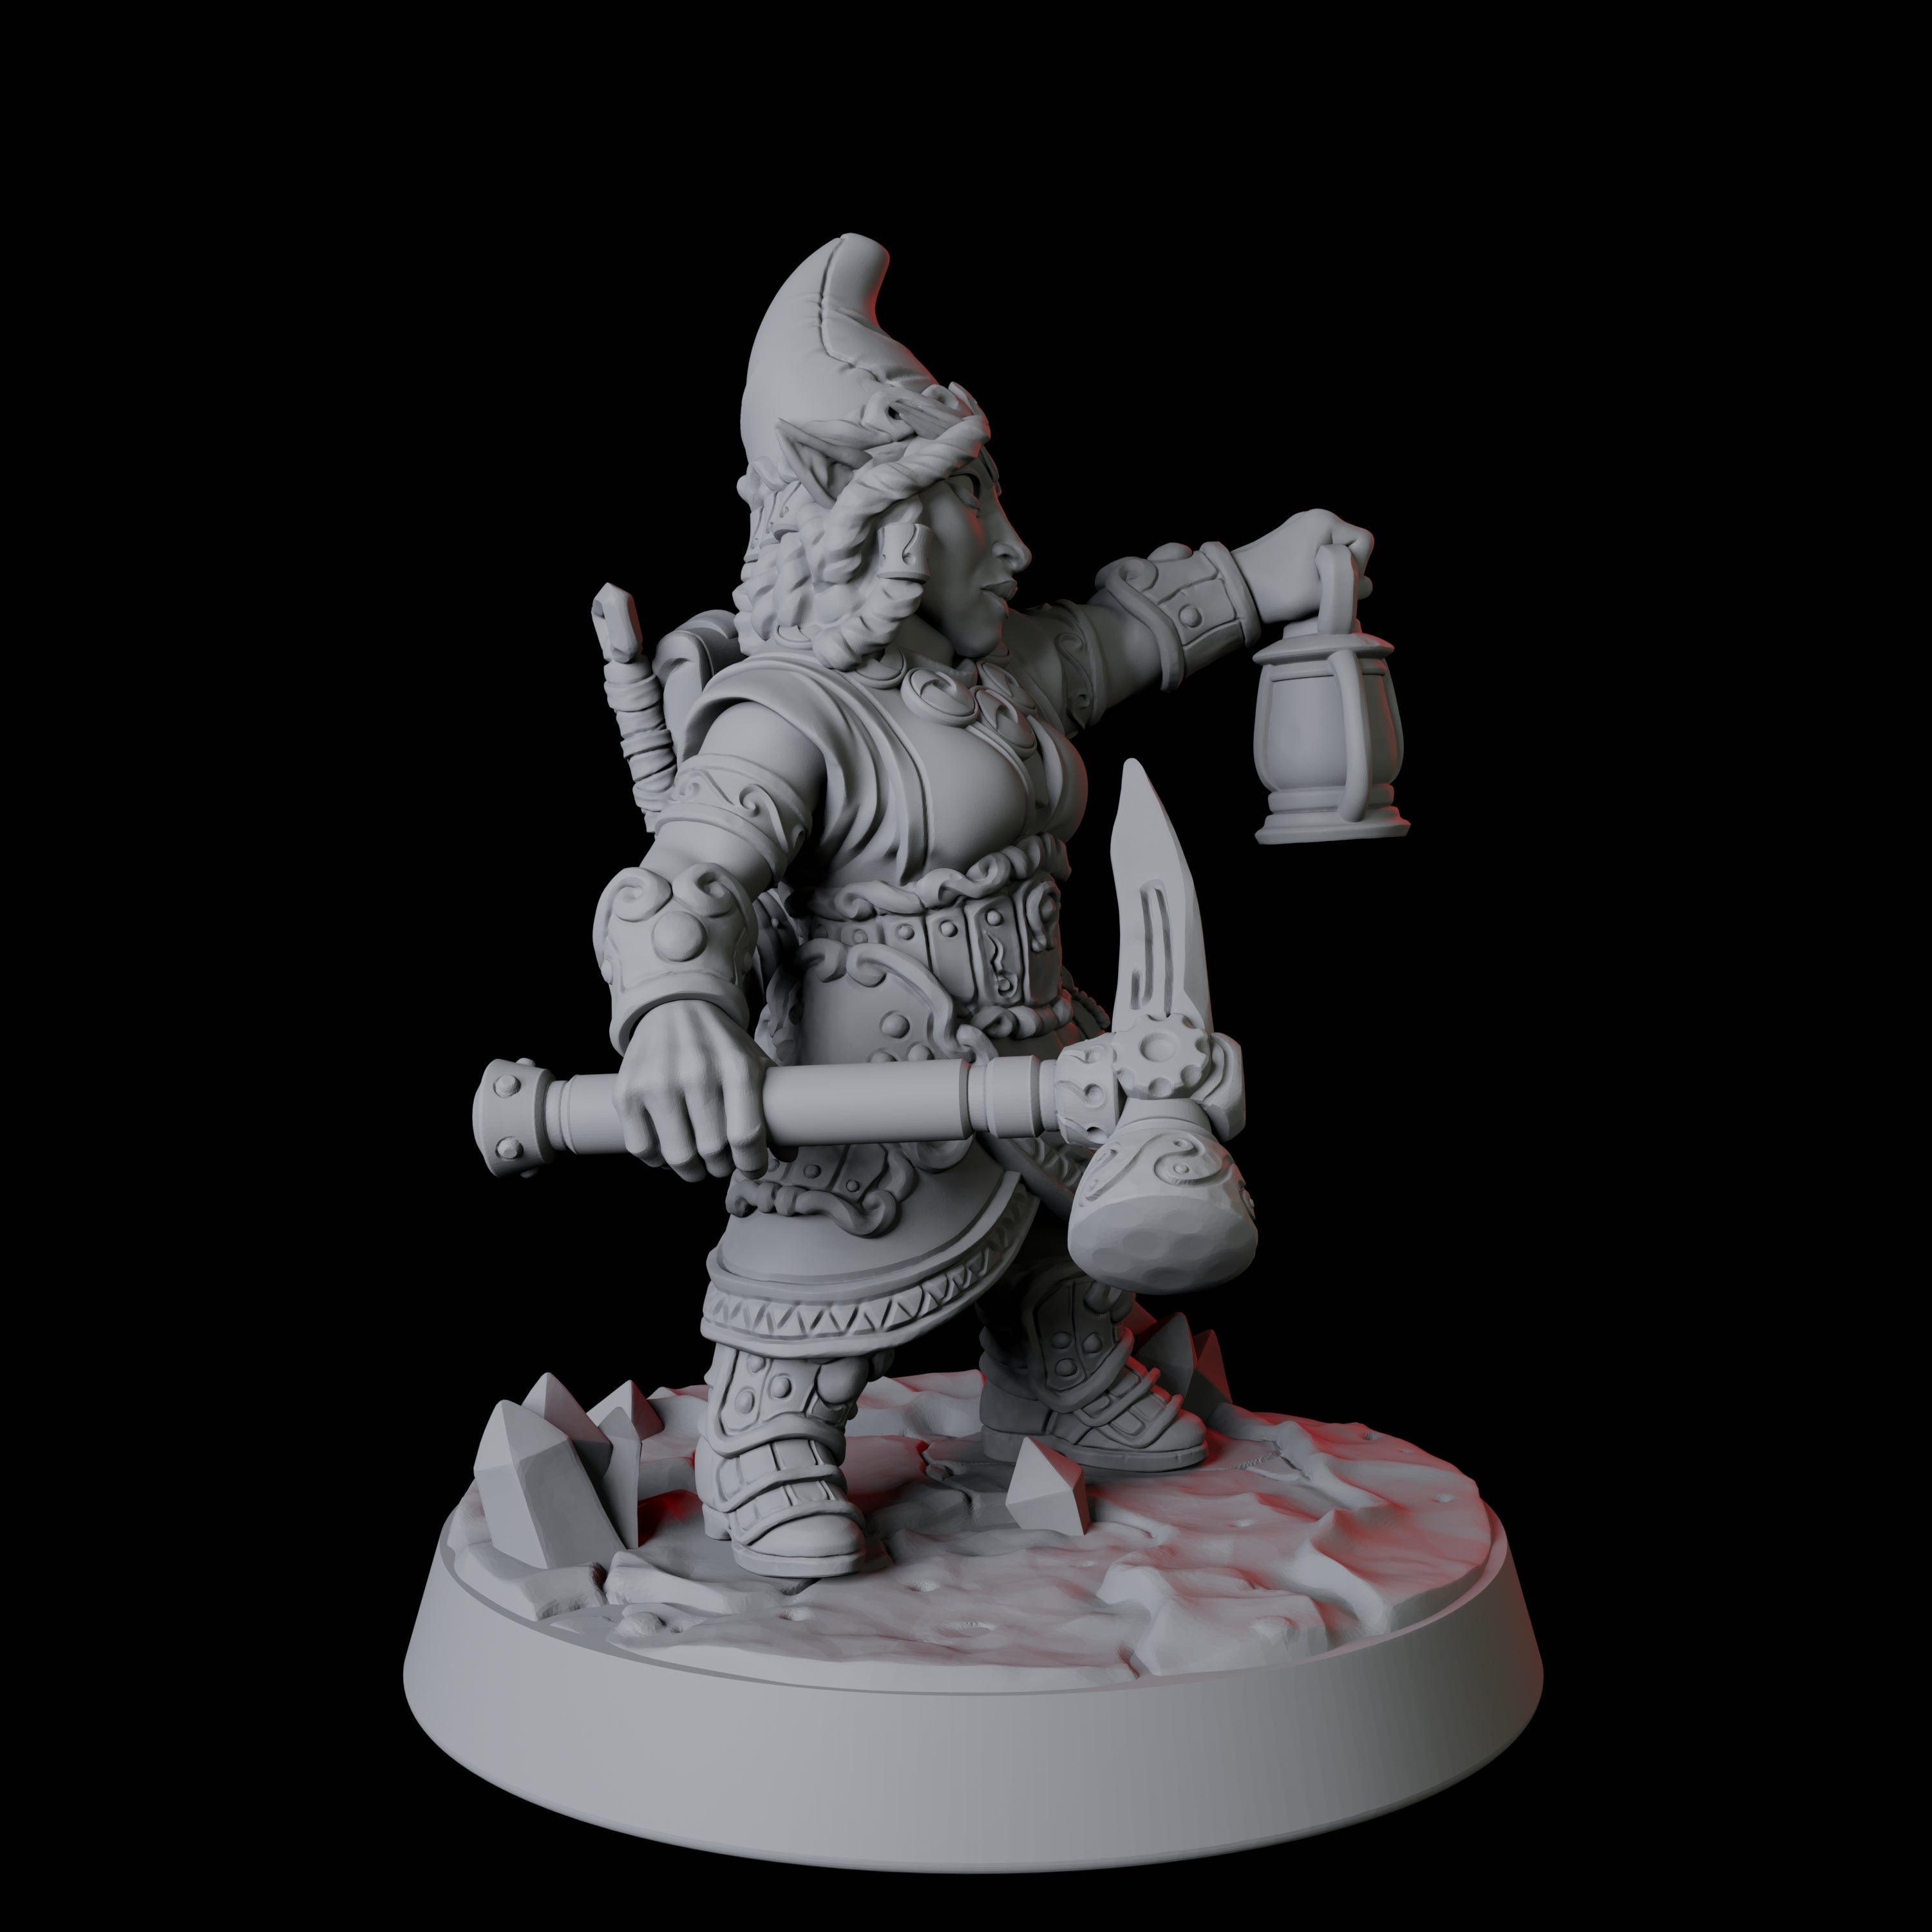 Gnome Miner D Miniature for Dungeons and Dragons, Pathfinder or other TTRPGs